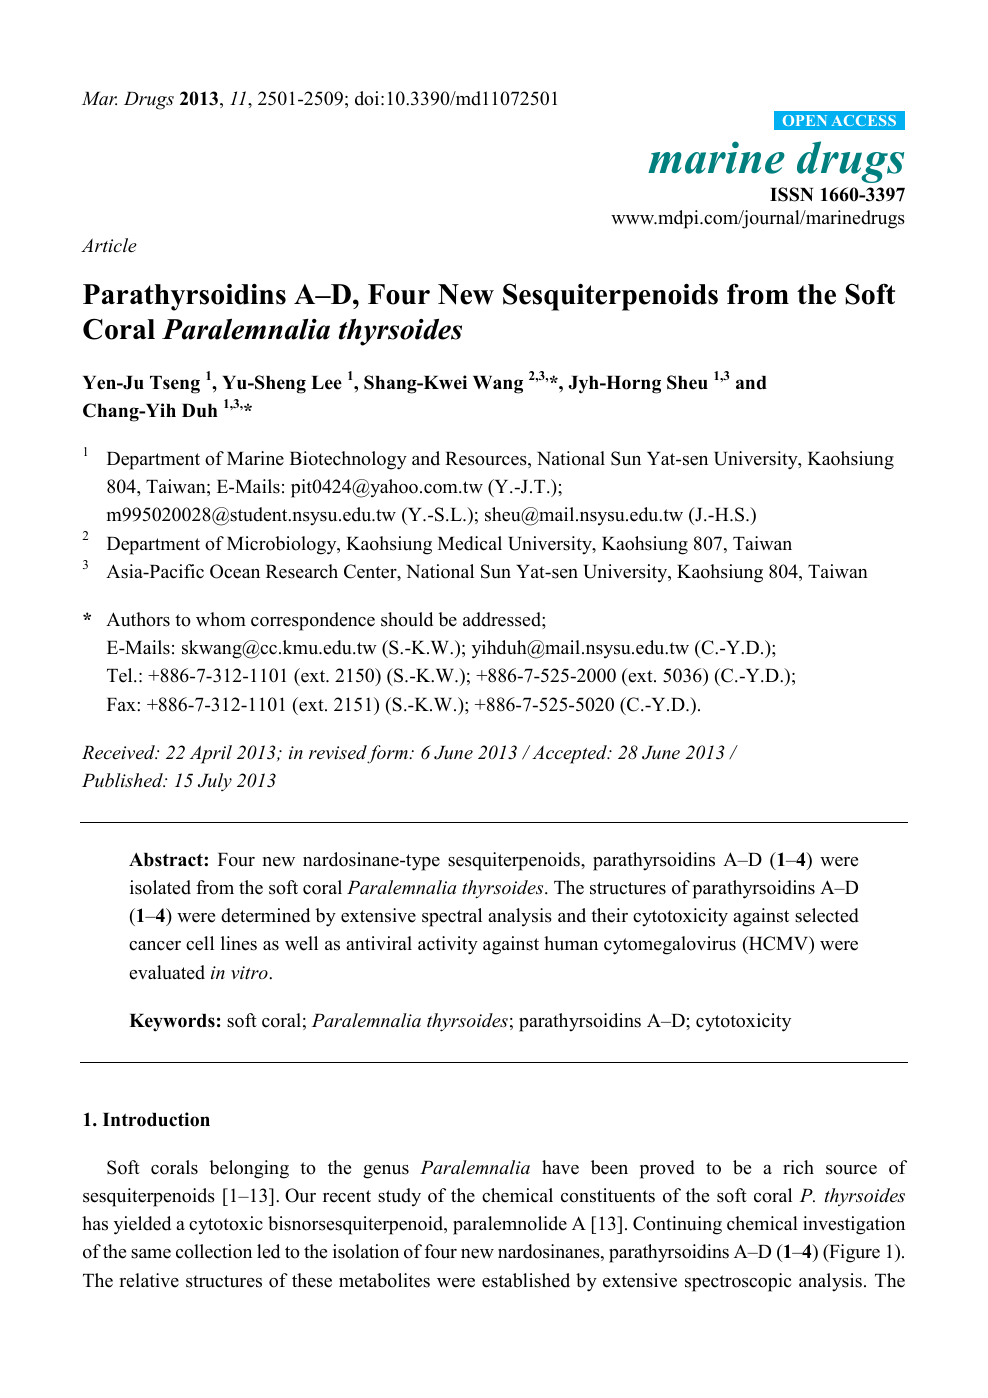 Parathyrsoidins A D Four New Sesquiterpenoids From The Soft Coral Paralemnalia Thyrsoides Topic Of Research Paper In Chemical Sciences Download Scholarly Article Pdf And Read For Free On Cyberleninka Open Science Hub